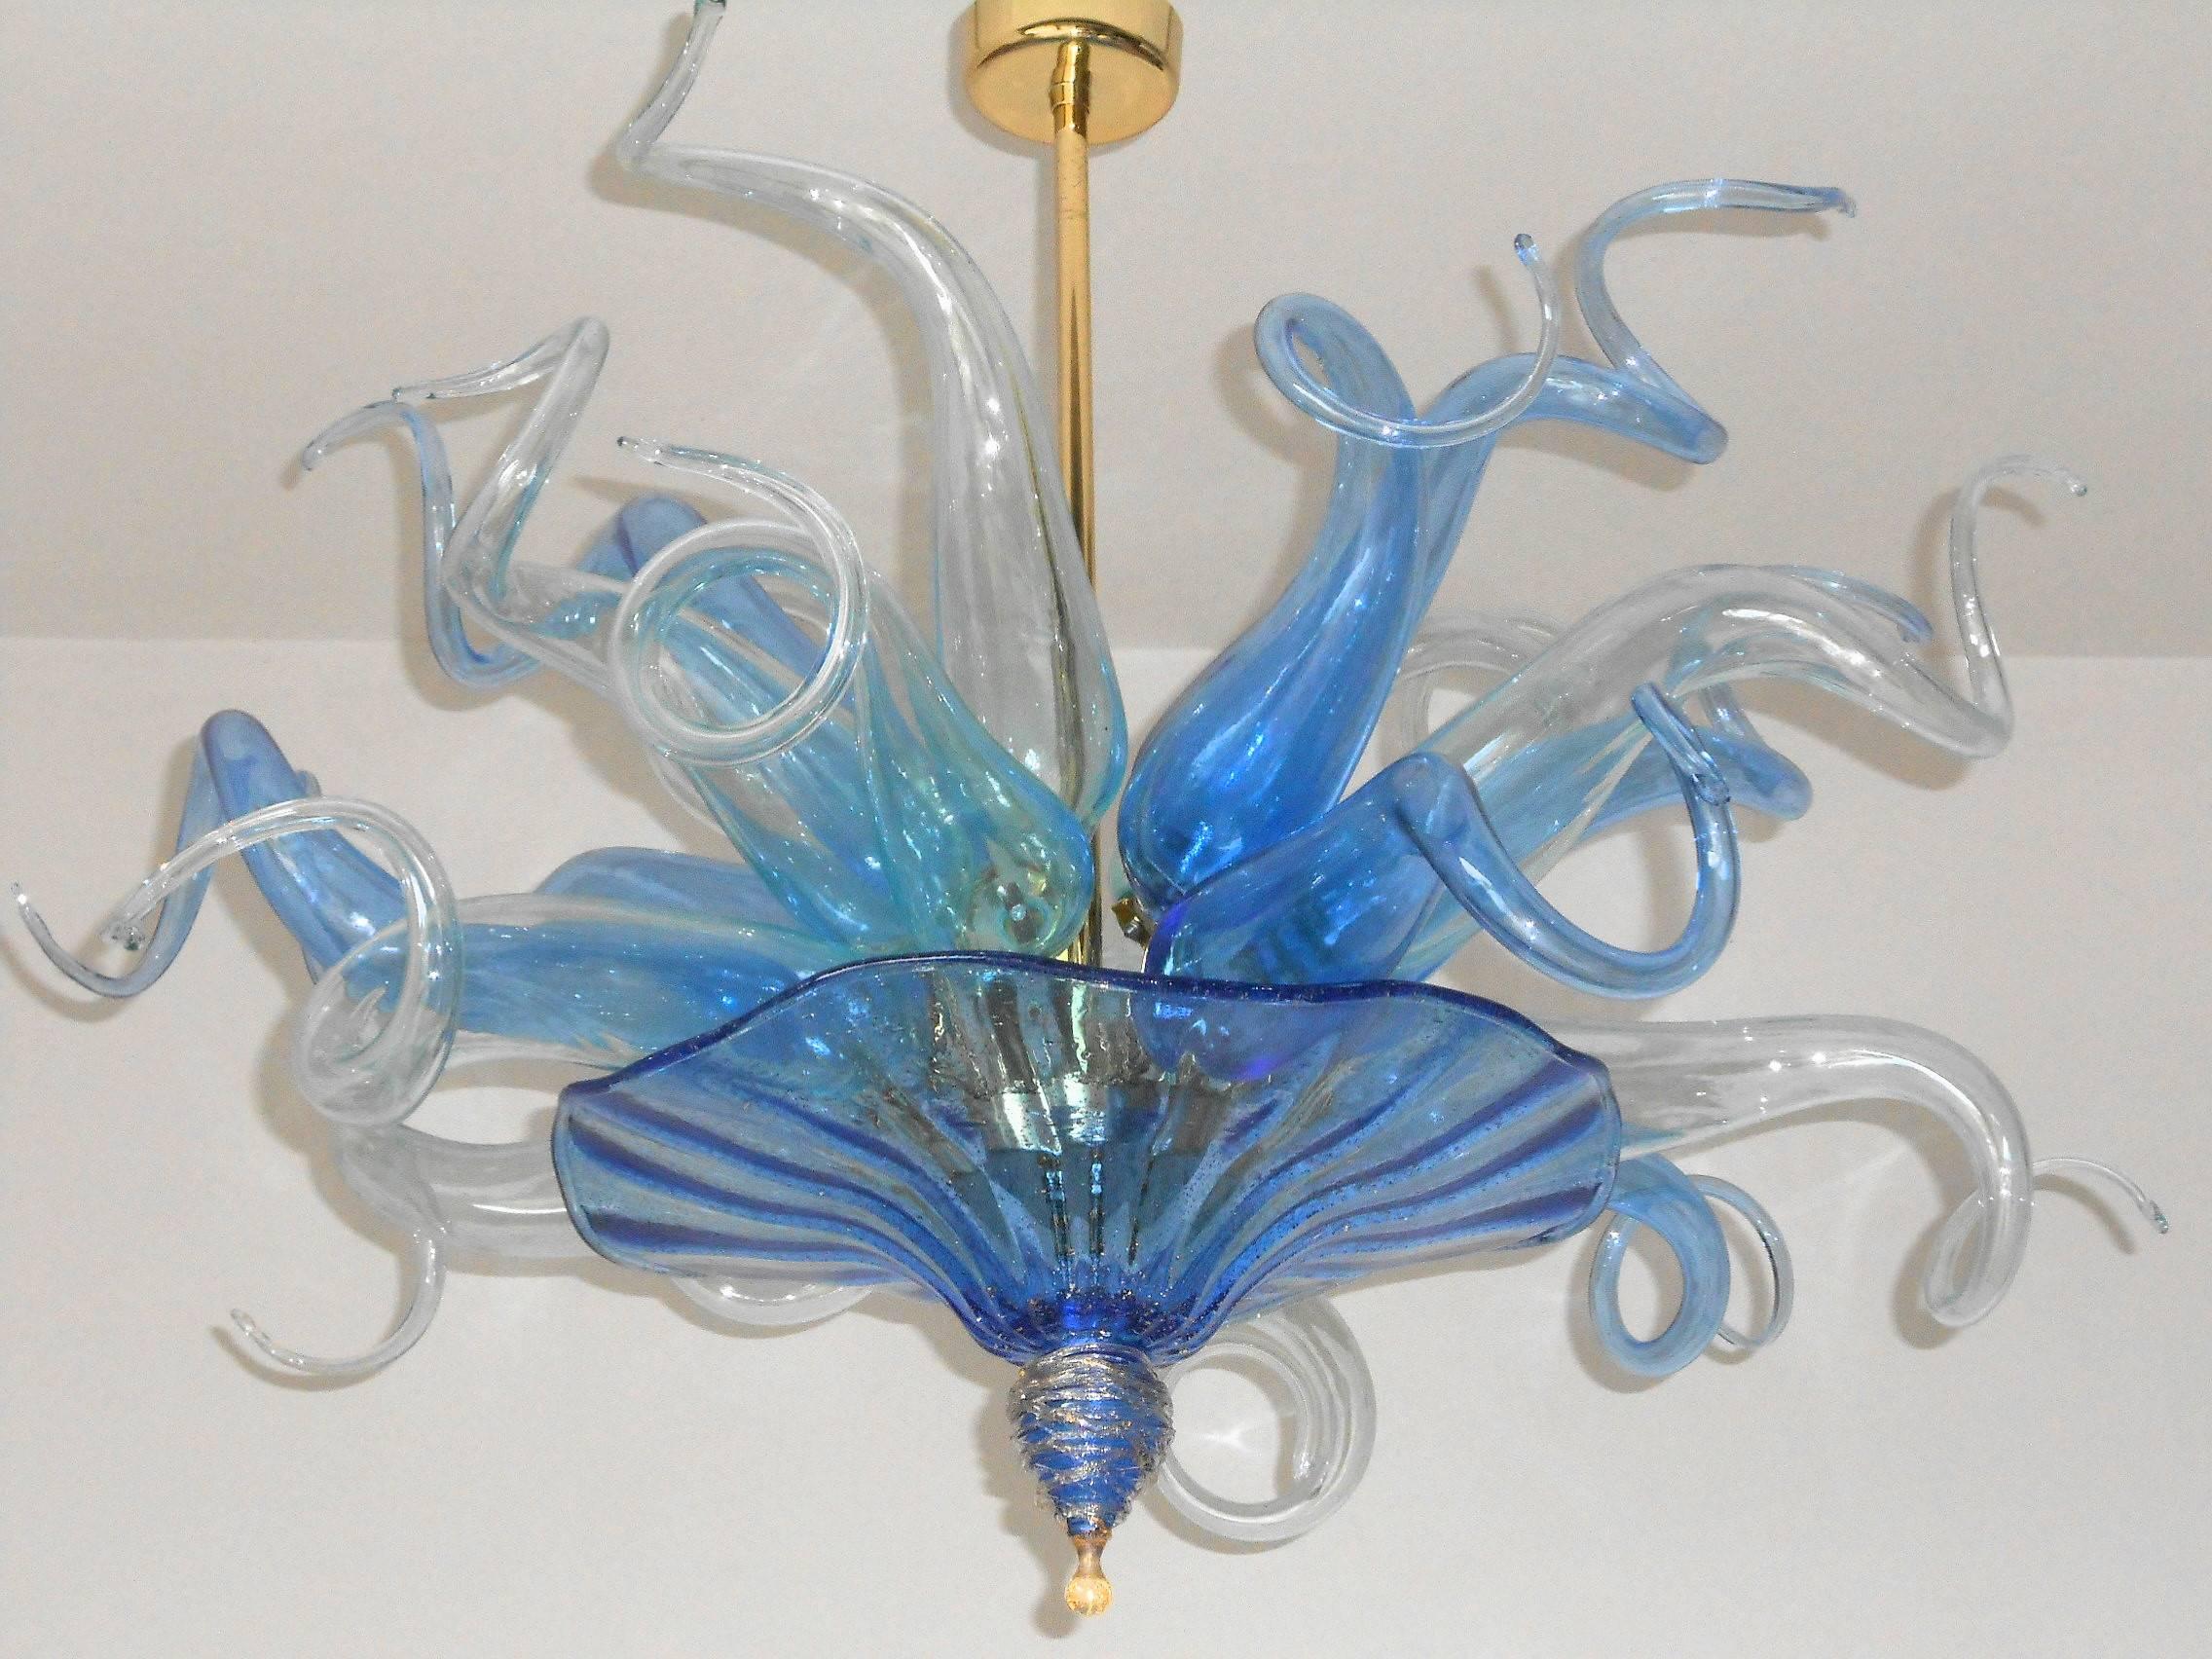 Blue and clear glass, base plate and finial with 24-karat gold infused.

Five light sockets / wired for the US.